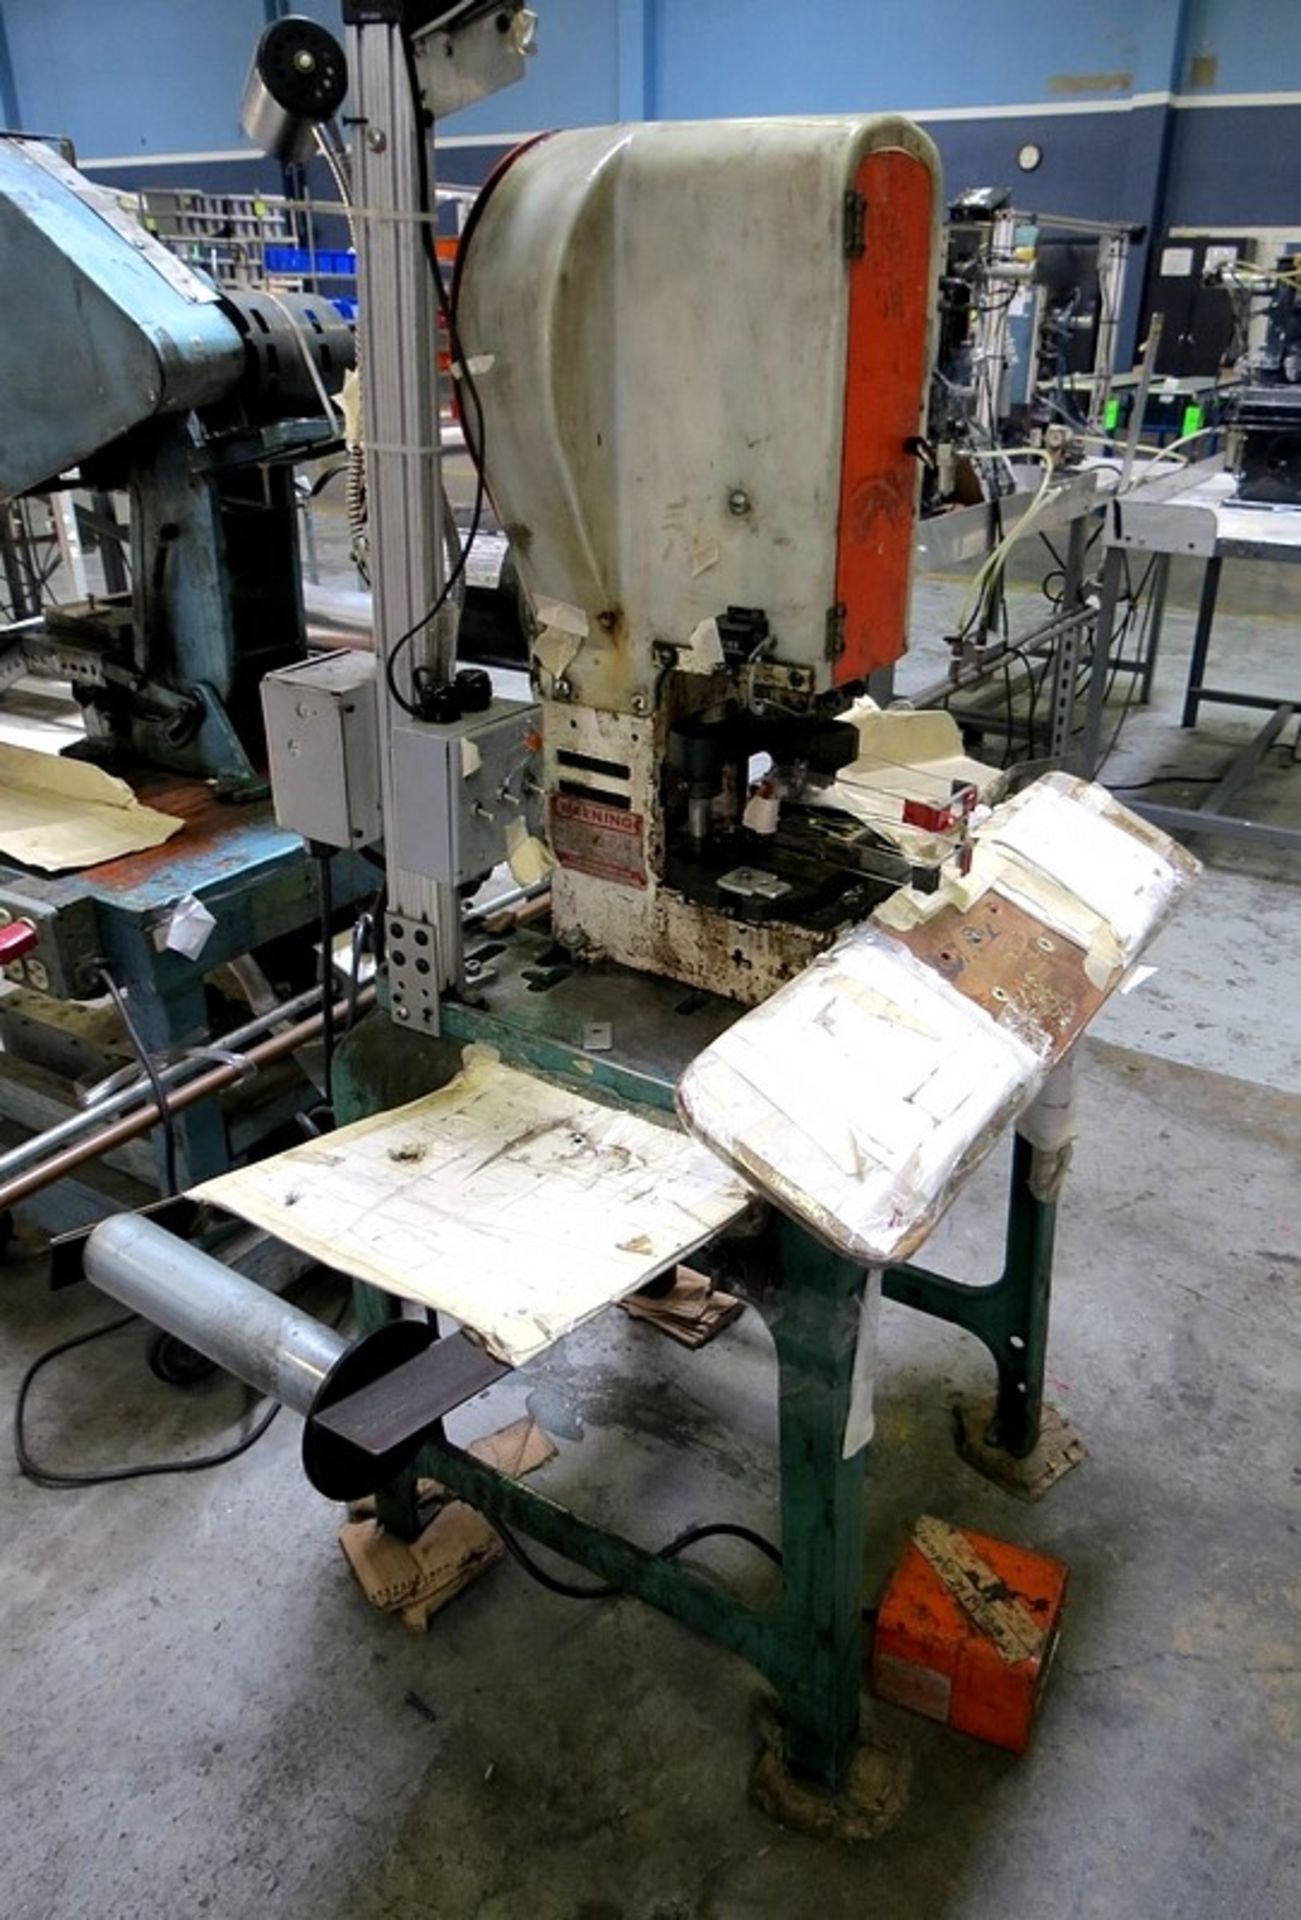 ELECTRIC CUTTING PRESSES, 0.5 HP AC MOTOR, MANUAL FEED, FOOT OPERATED, METAL TABLE STAND, NO.6 - Image 2 of 2